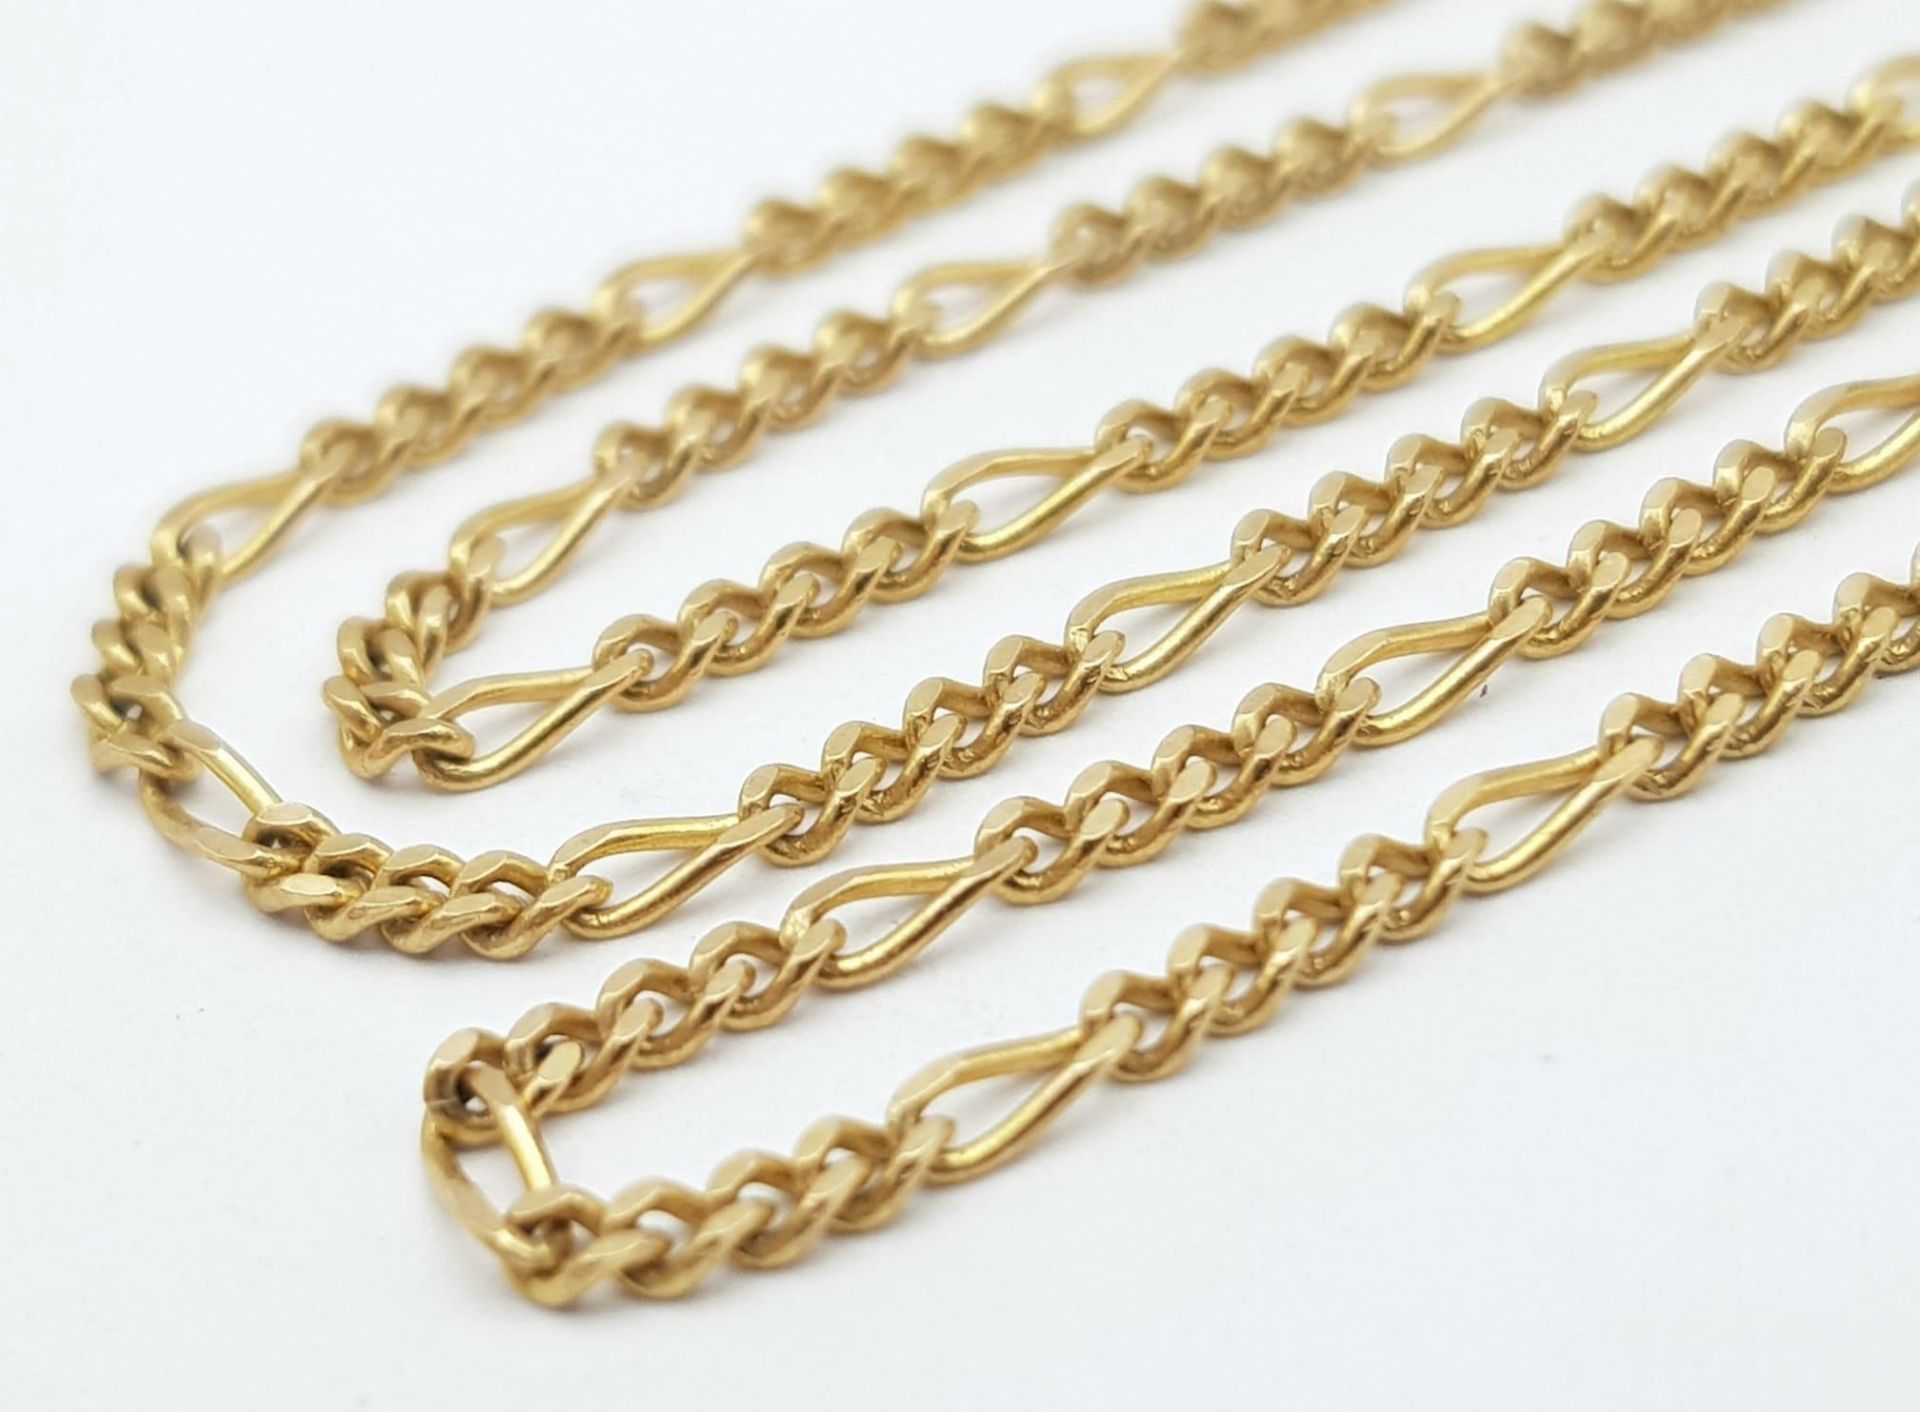 A 9K Yellow Gold Disappearing Necklace. 40cm. 2.2g weight. - Image 3 of 4